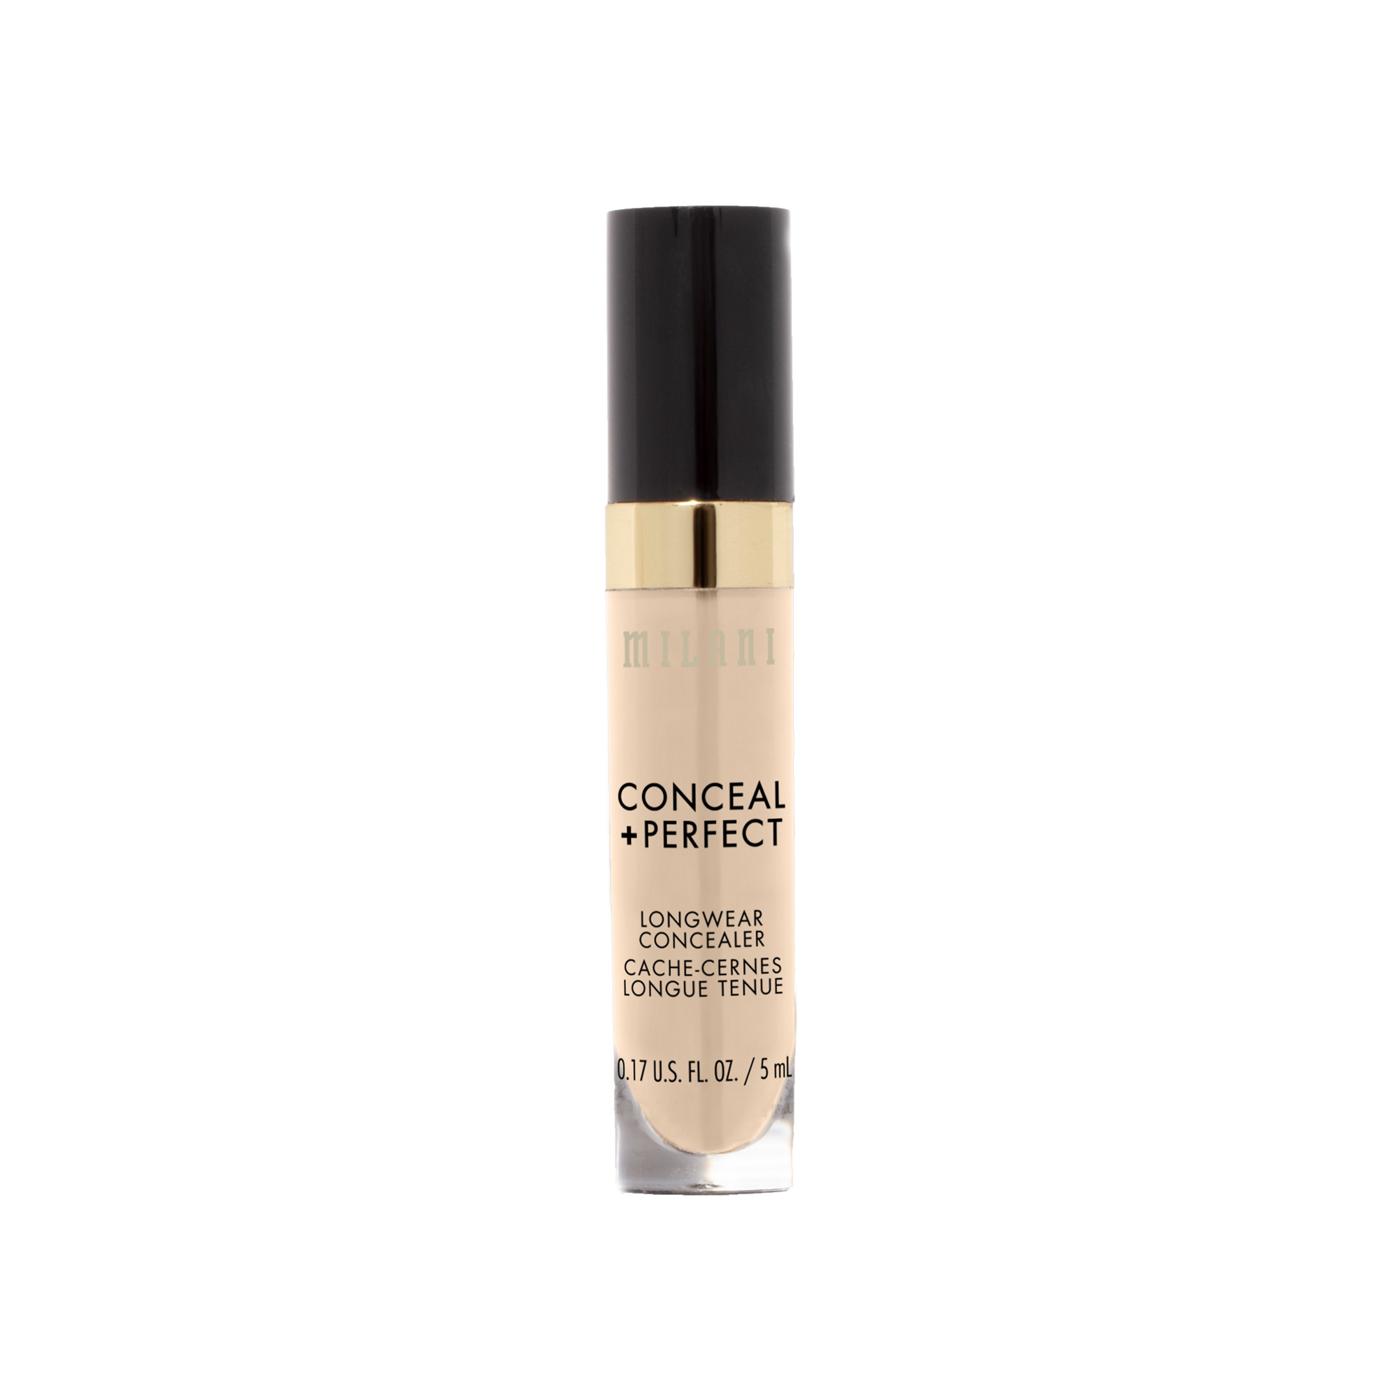 Milani Conceal +Perfect Longwear Concealer - Nude Ivory; image 1 of 10